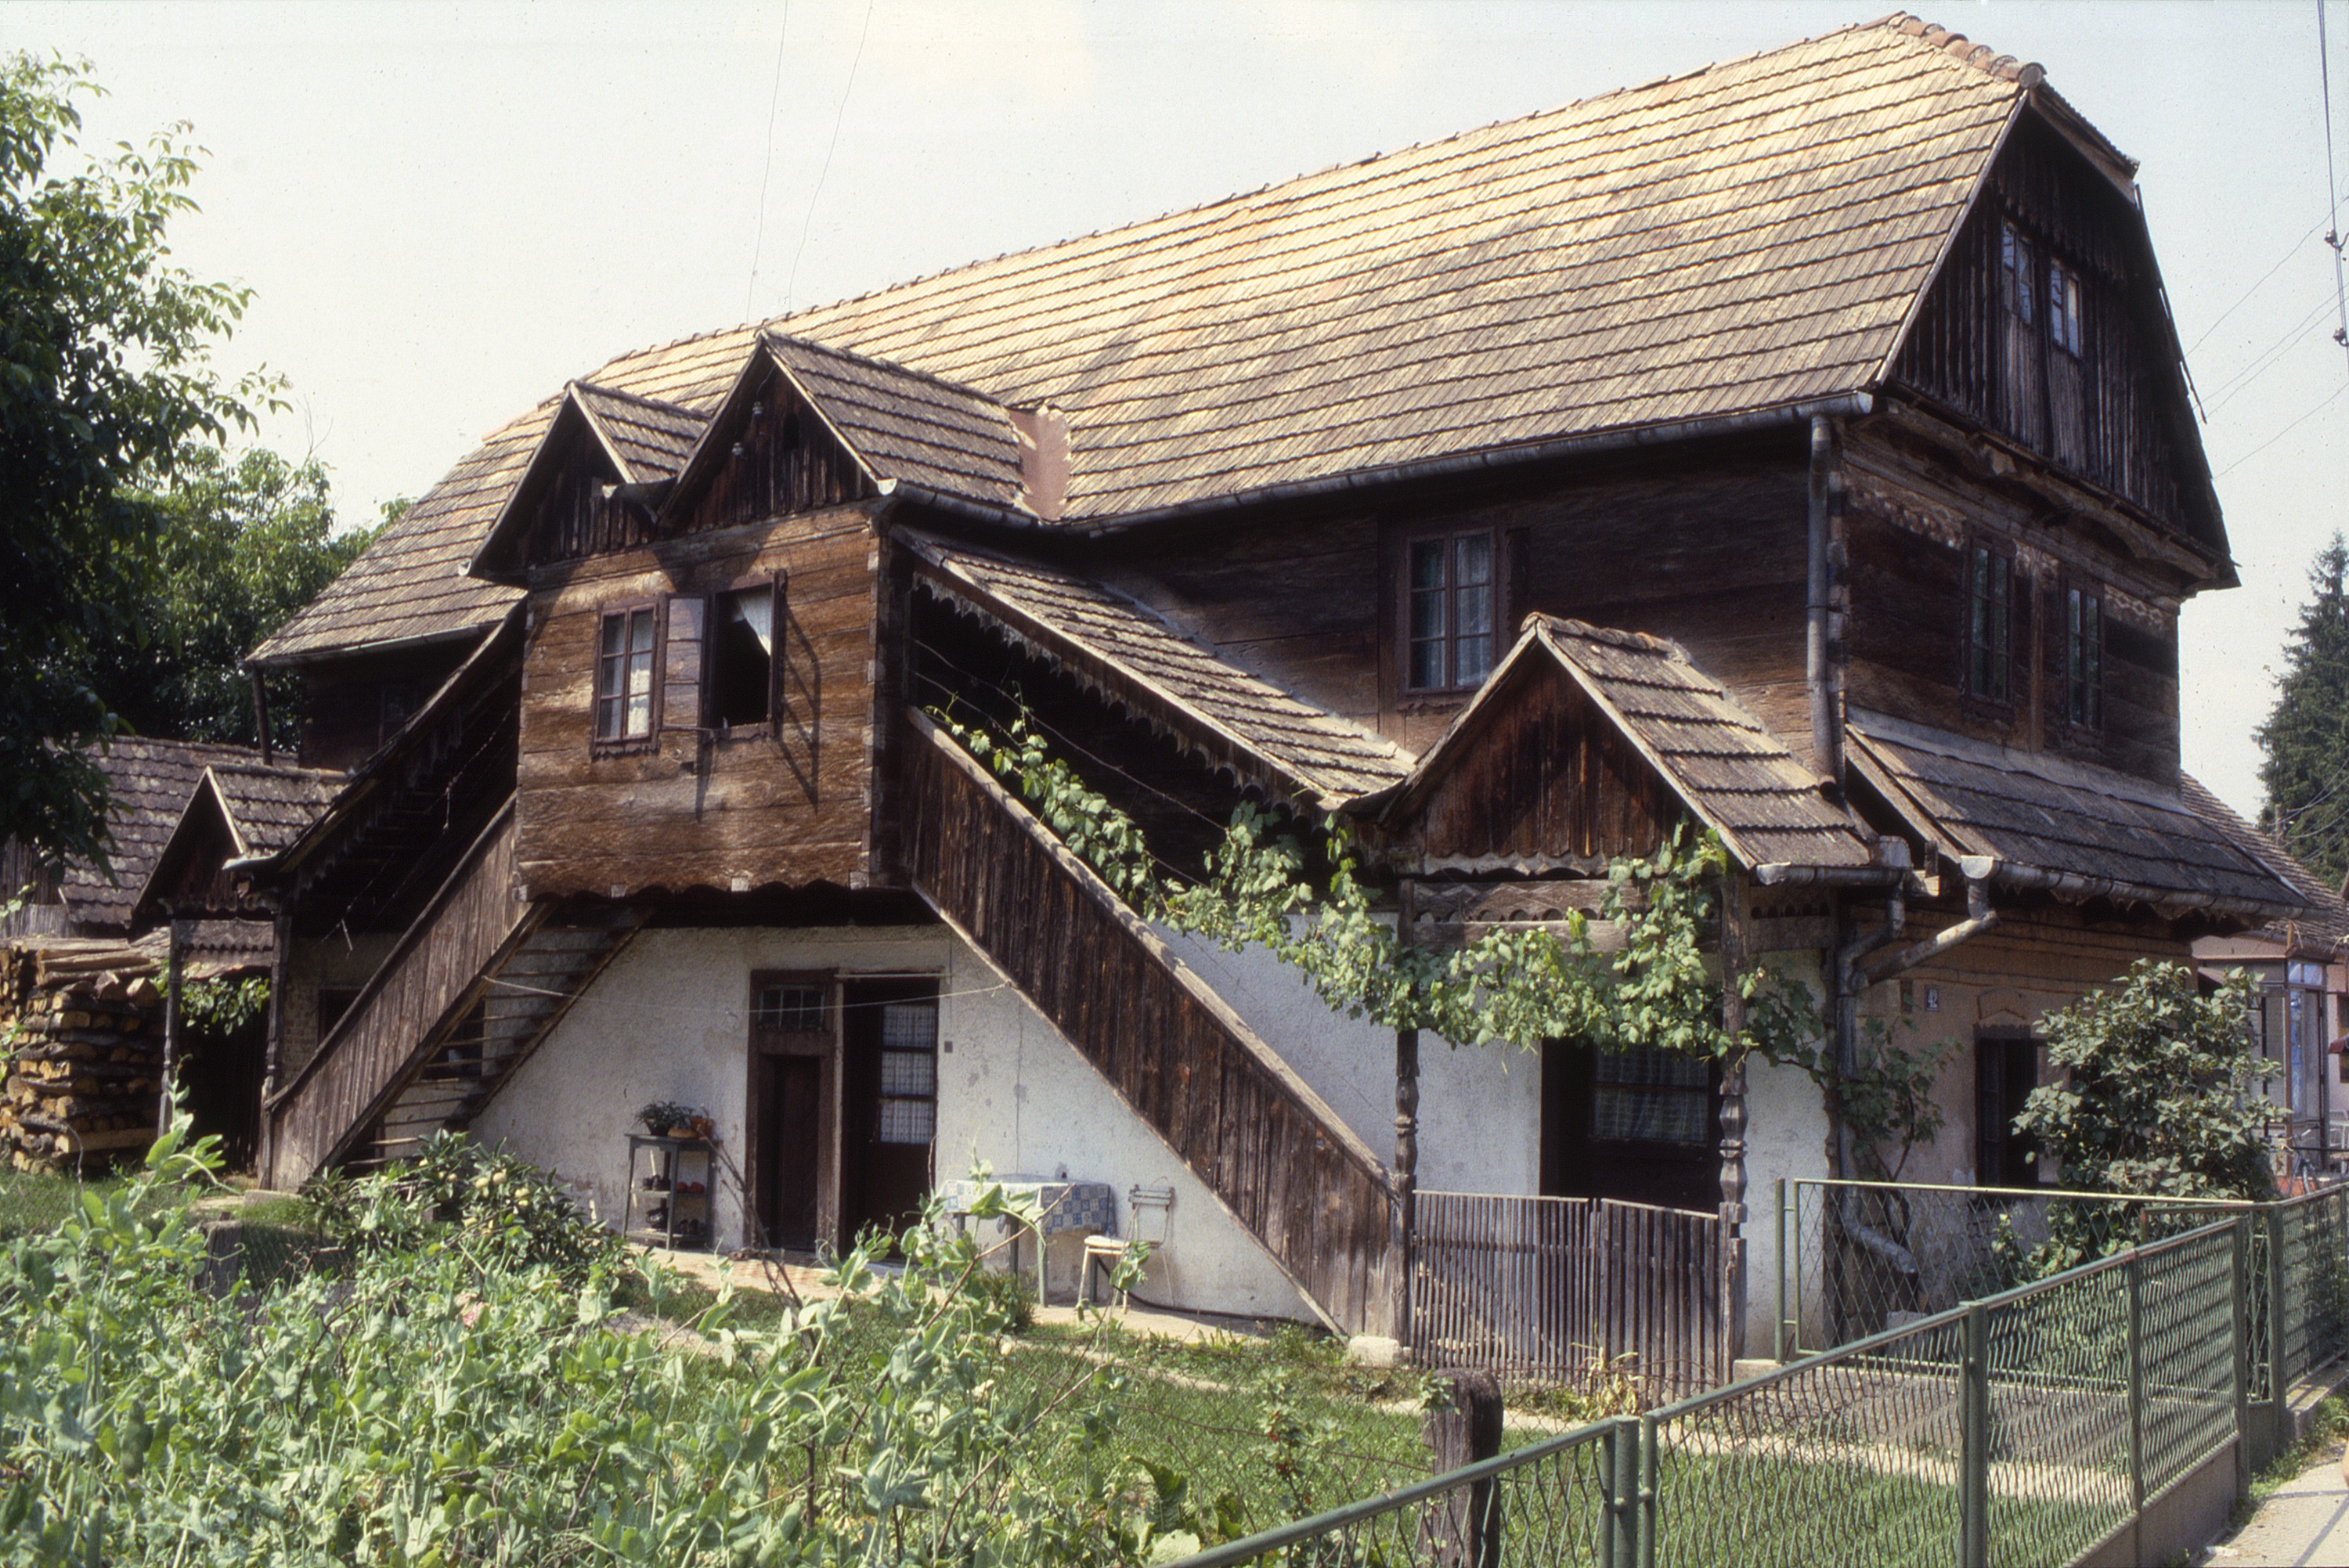 Judith Bing - <p>Lekenik is a town along the main road from Zagreb to Sisak, and this house is typical of the čardak dwellings along this route, yet distinguished by its doubled stair which provides access to both street and yard. Small roof gables articulate these two entry ways at top and bottom. Plaster coats the ground level for added weatherproofing, and a pent roof protects this surface on the street elevation</p>